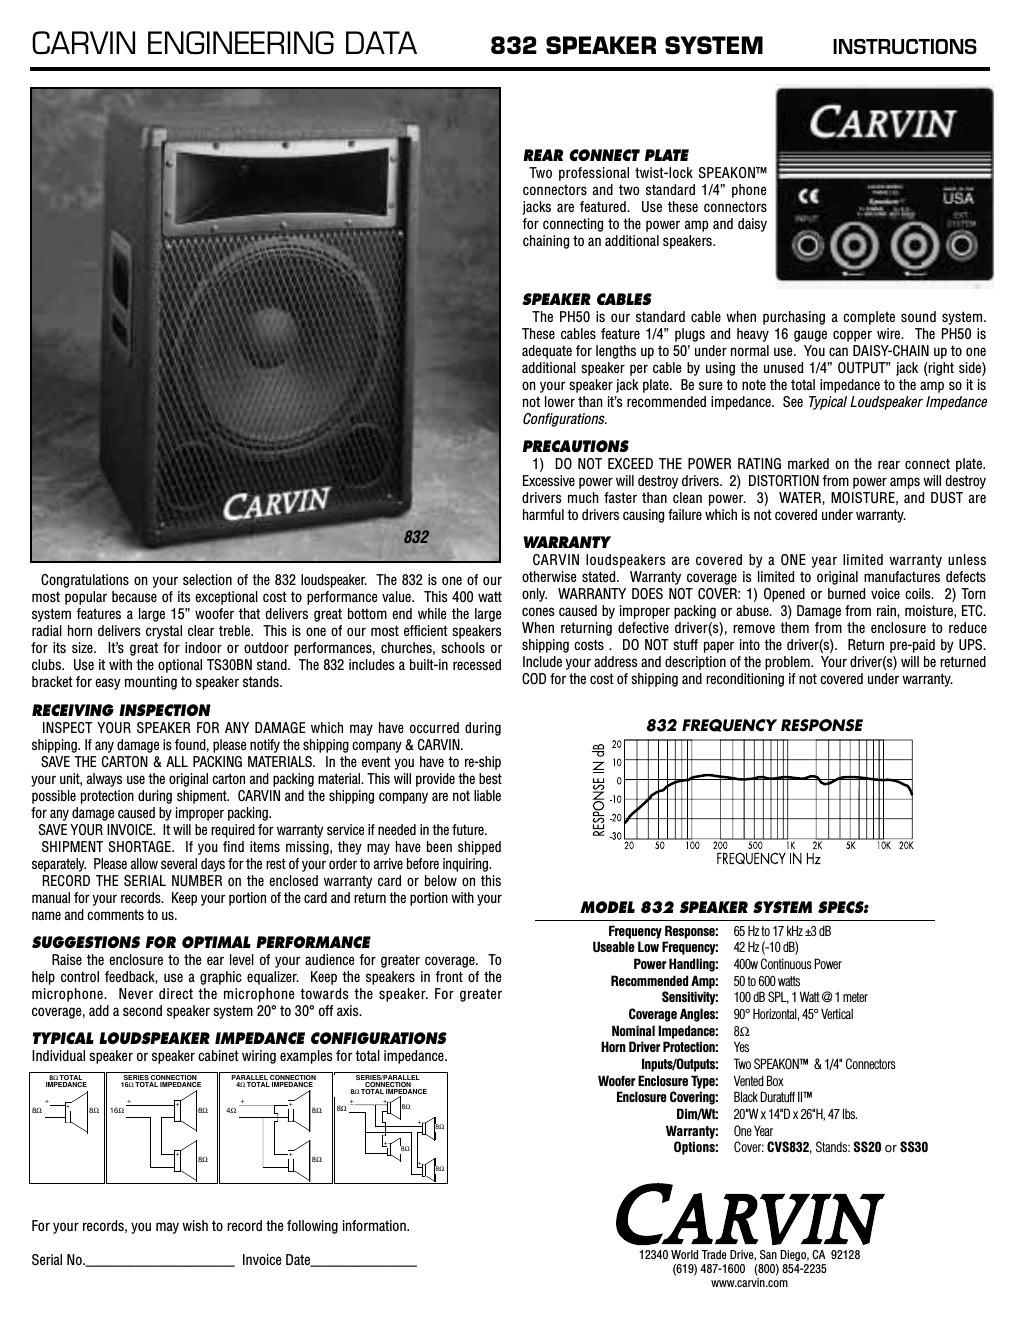 carvin 832 owners manual